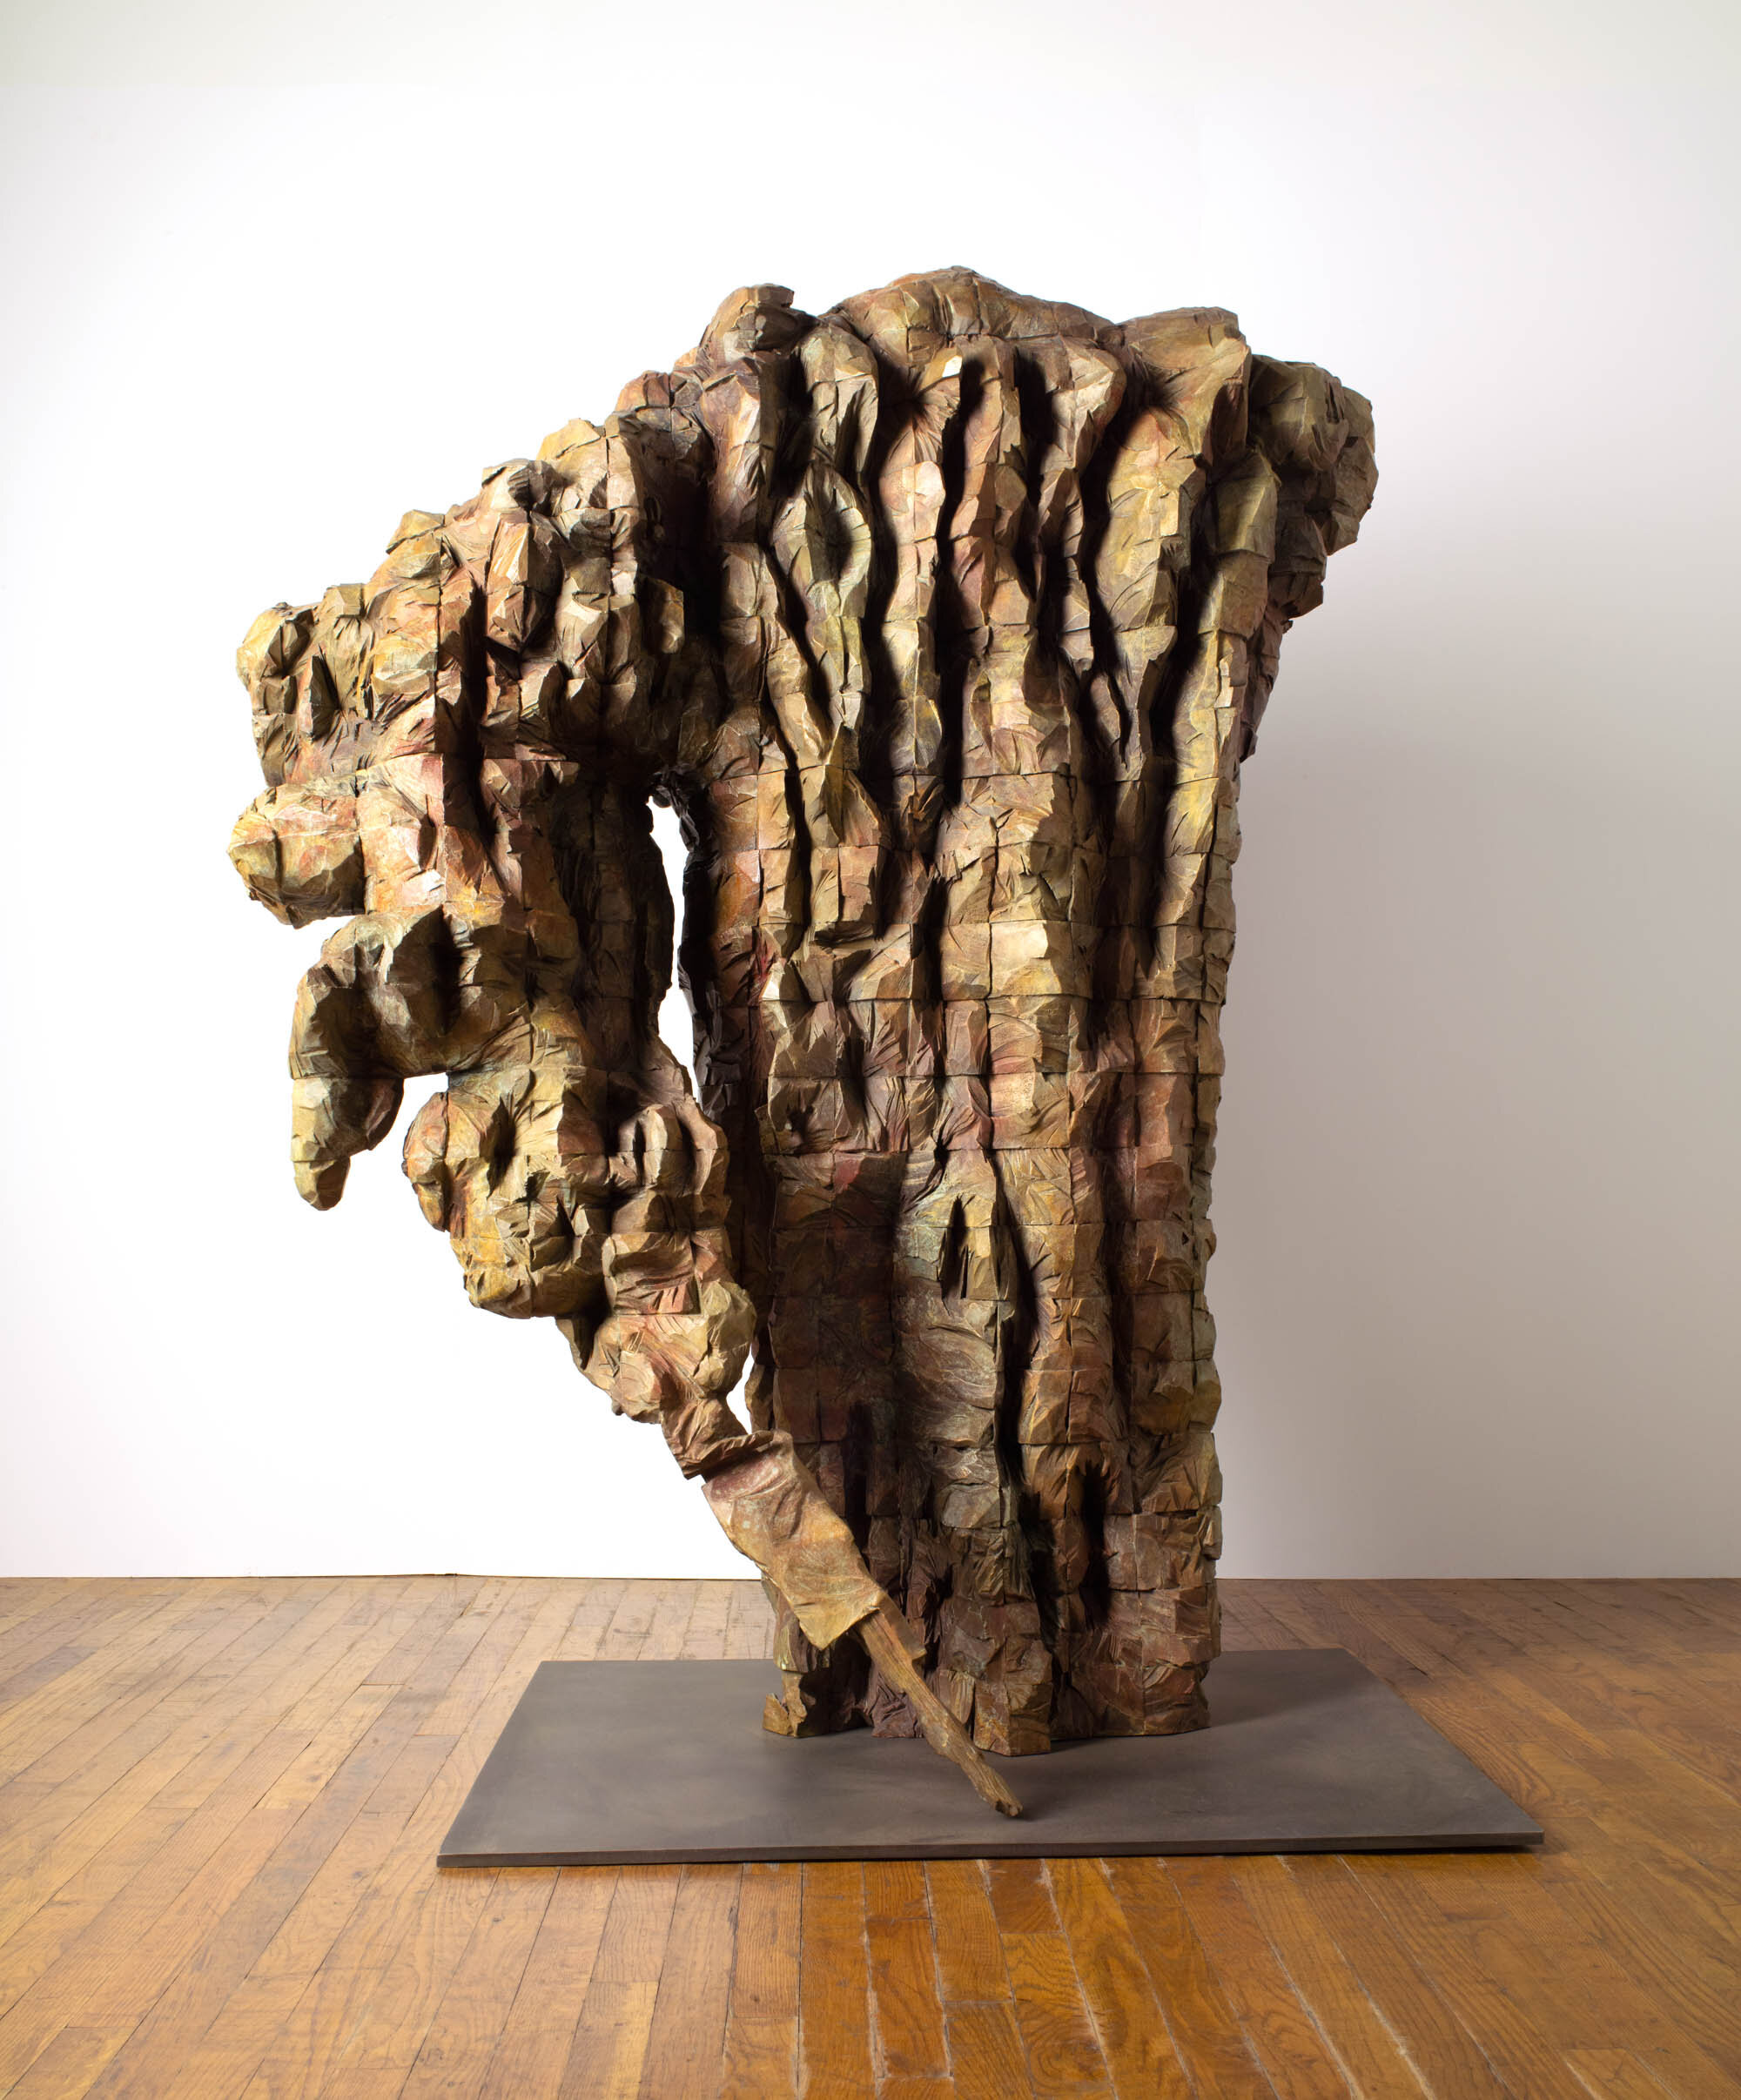      MALUTKA II, 2019 Bronze 70.5 x 53.25 x 37 in. Edition of 5, 1AP    MORE IMAGES  